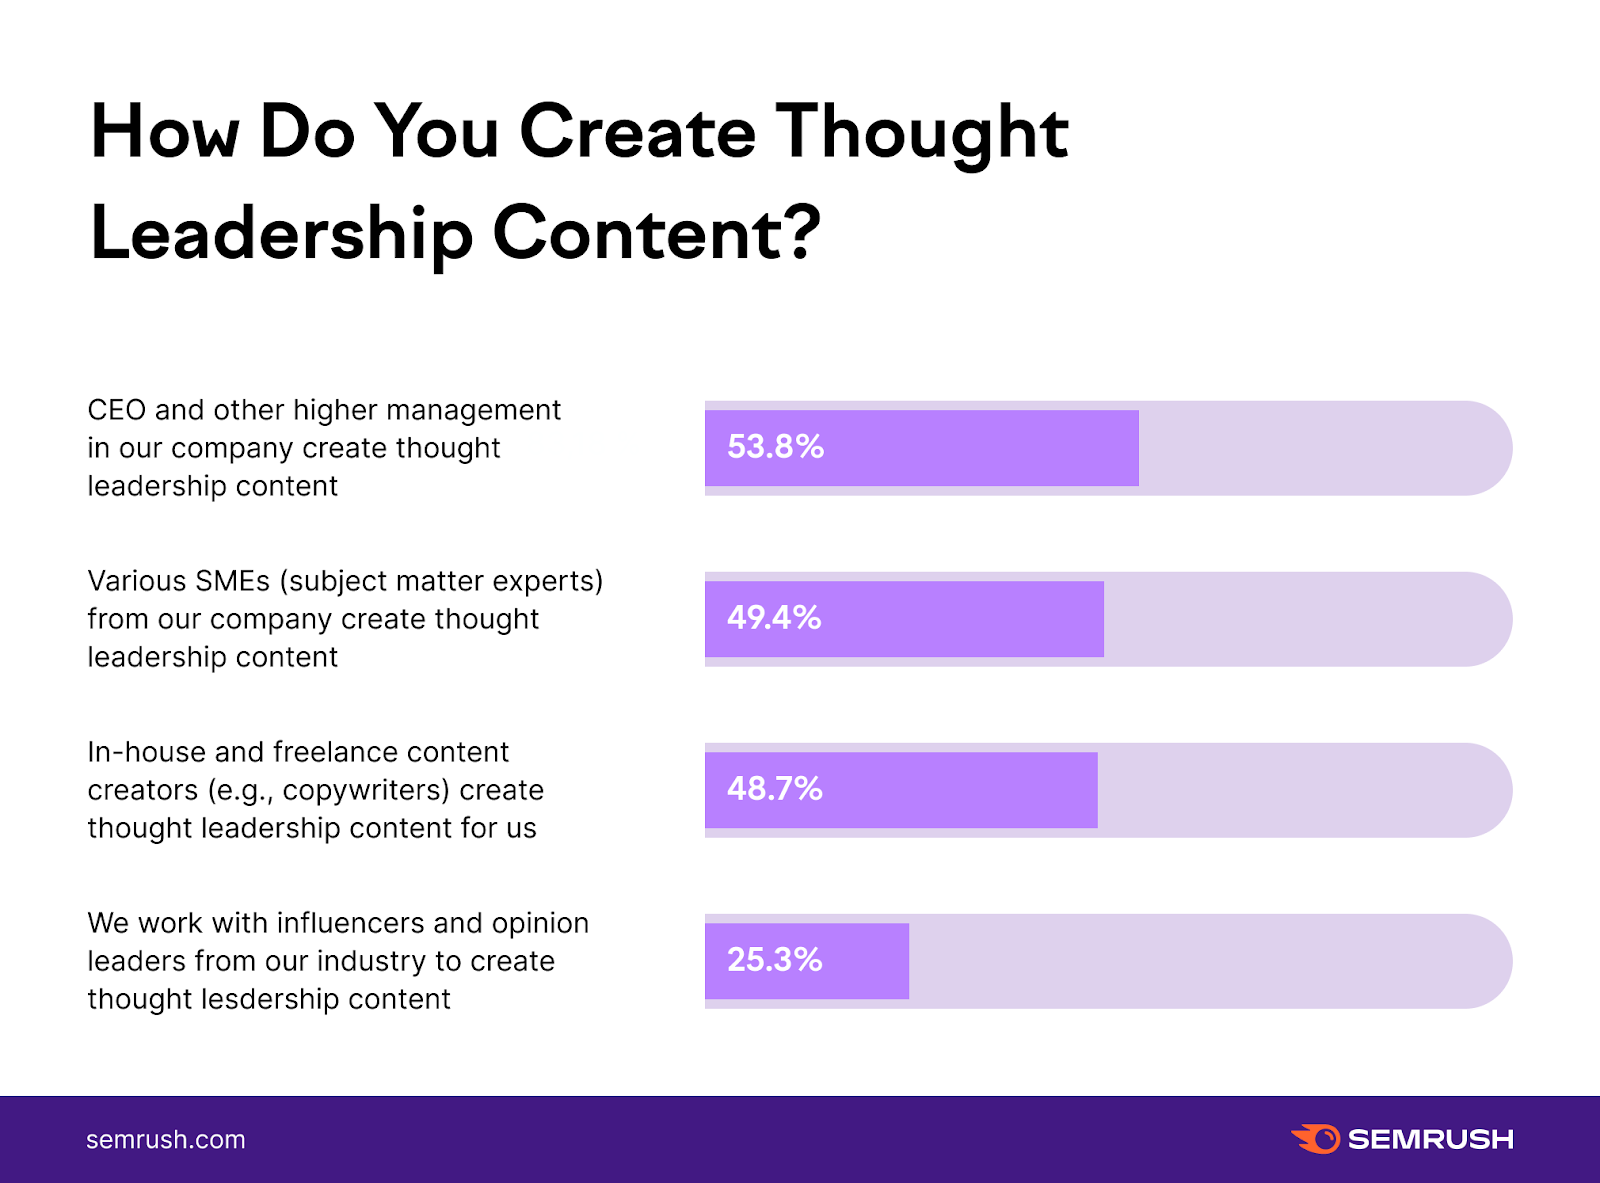 How do you create thought leadership content